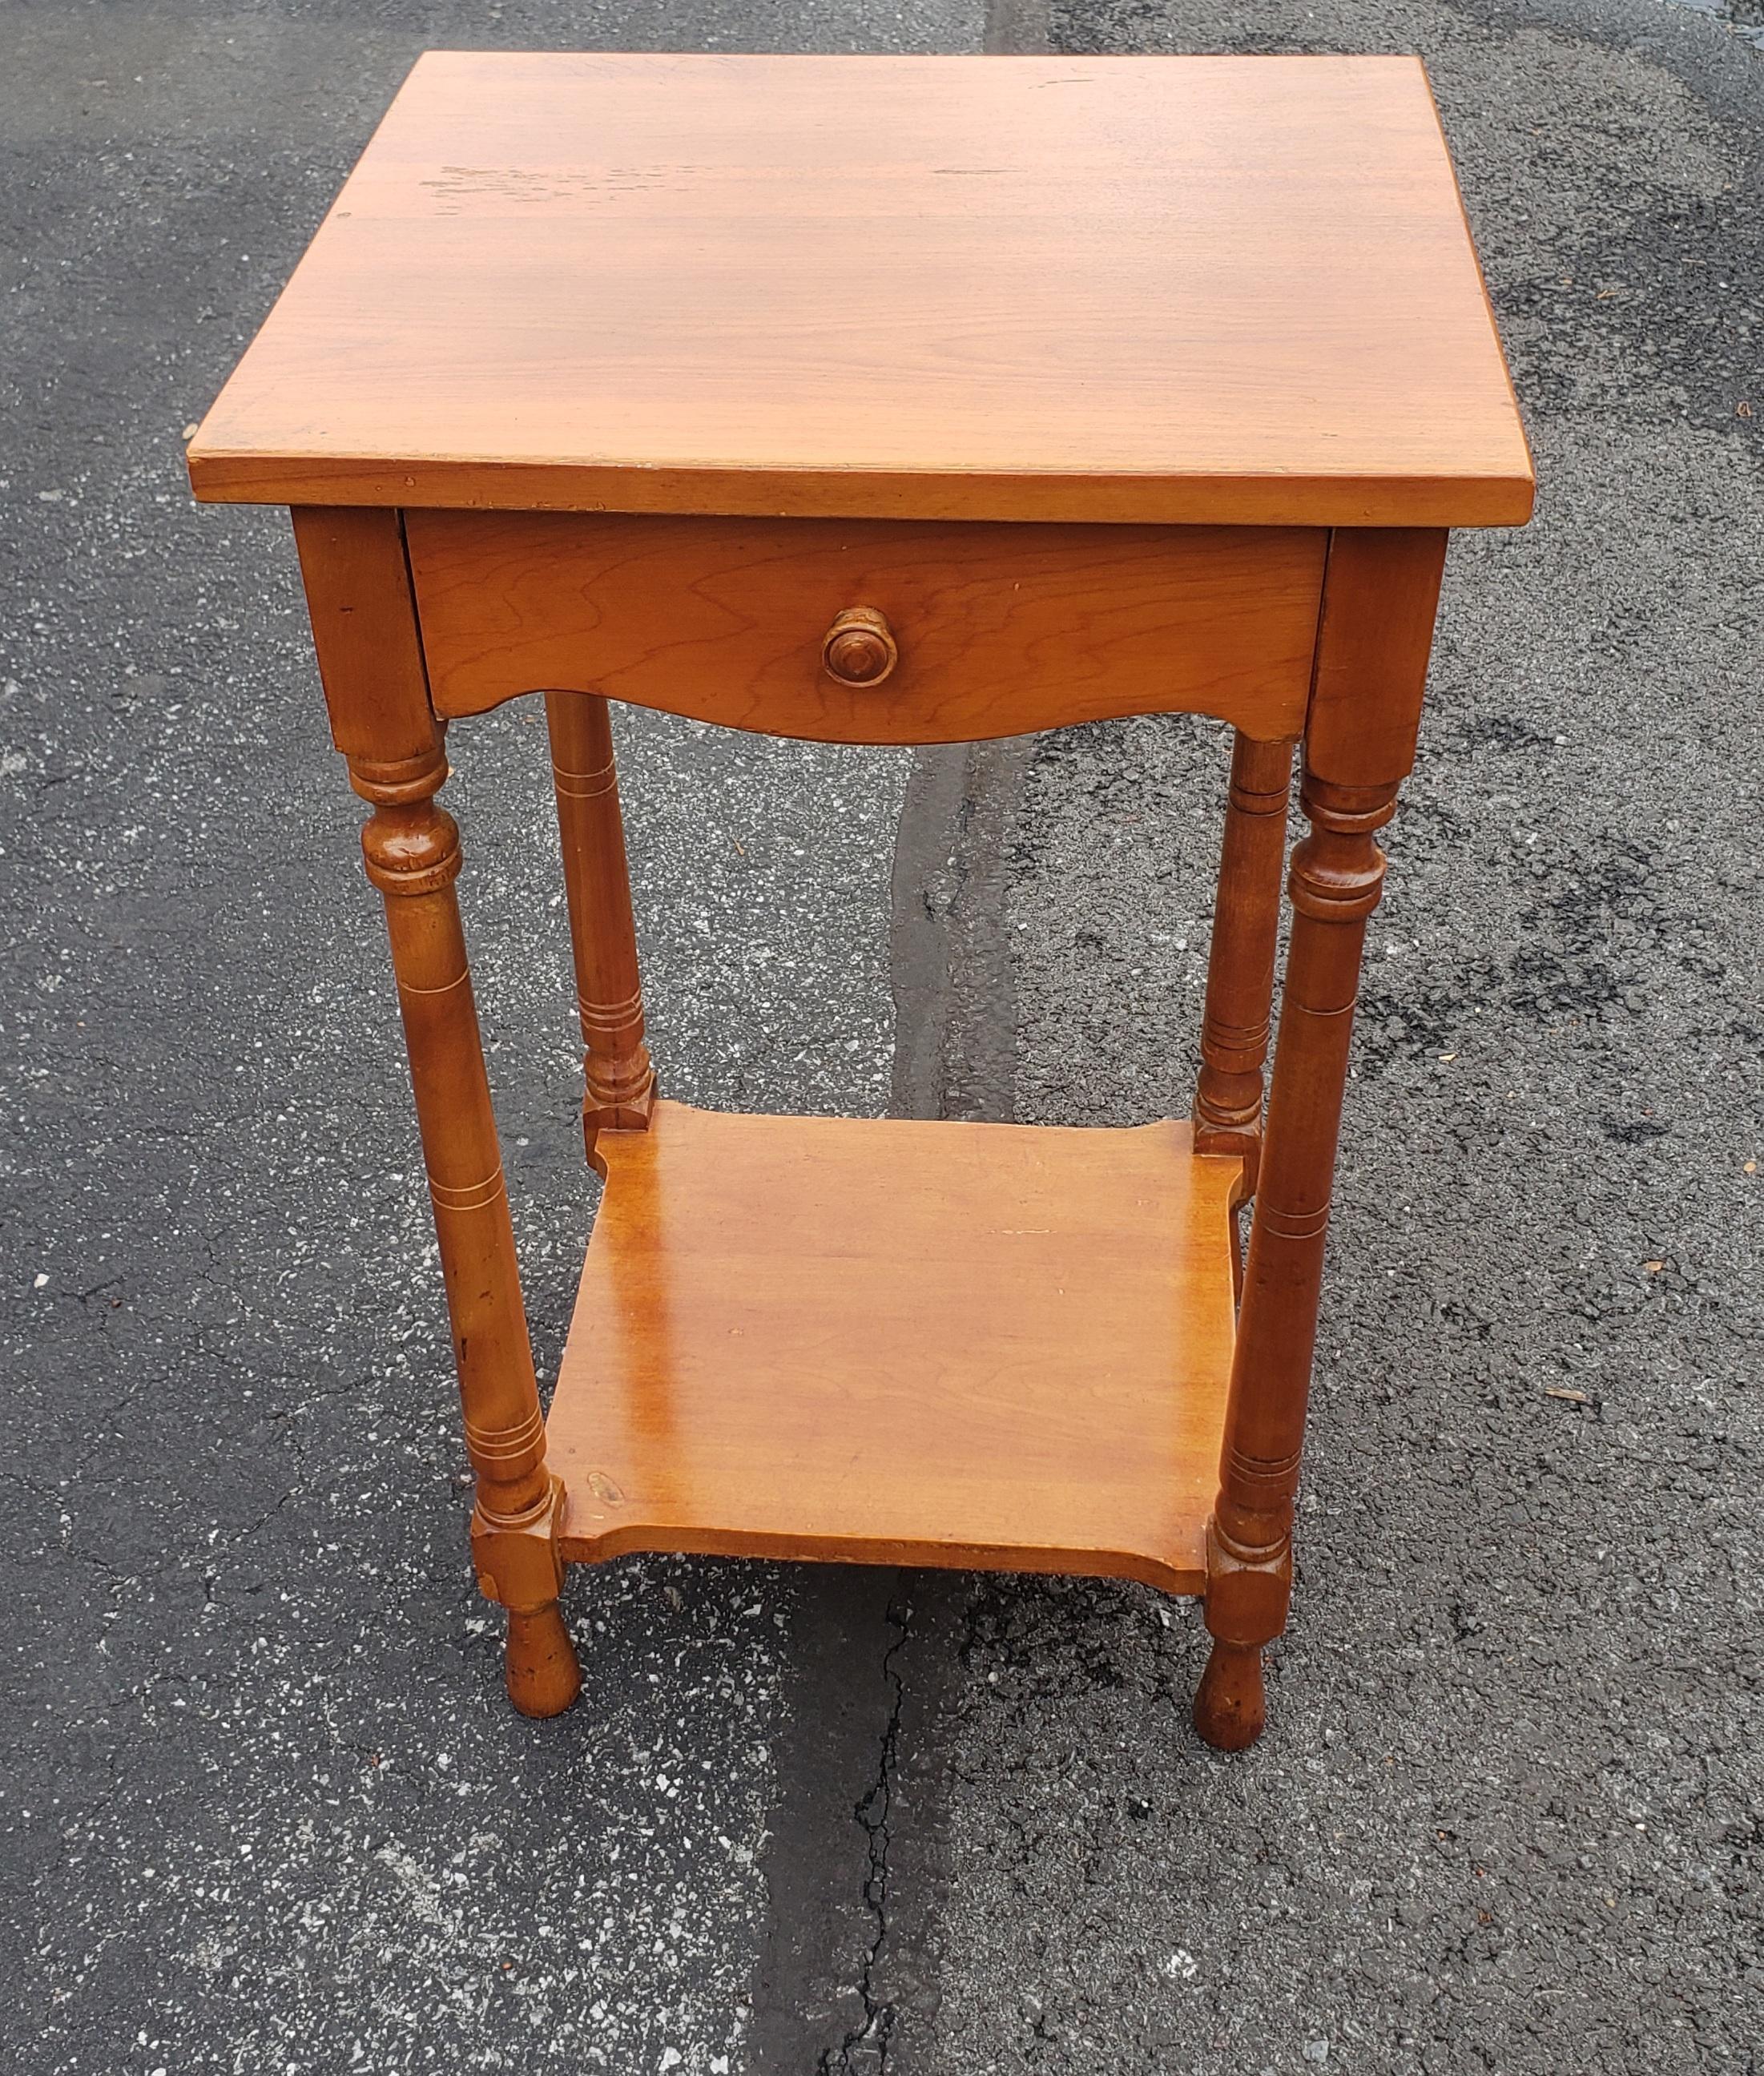 Mid-Century slender Whitney Furniture two tier Maple Single Drawer Side Table in good vintage condition.
Measures 16